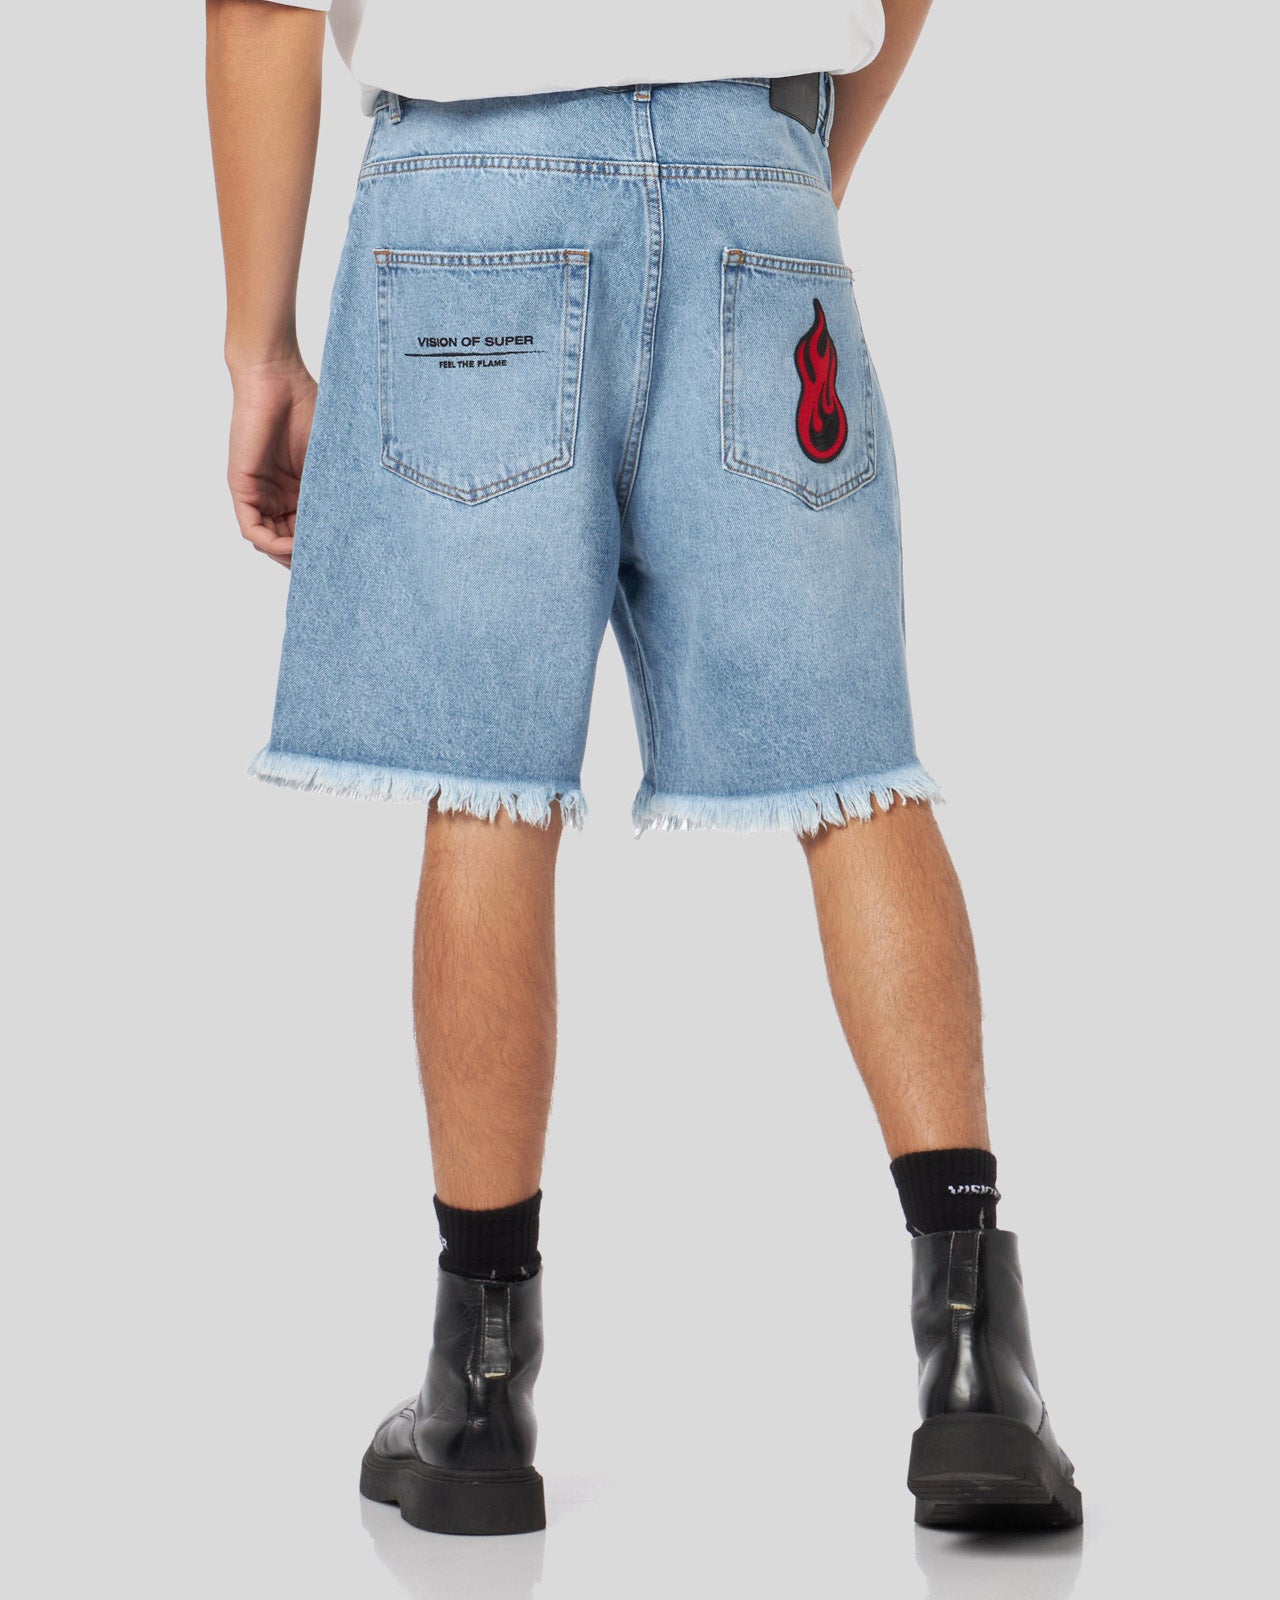 BLUE DENIM SHORTS WITH PRINTED LOGO AND FLAMES PATCH